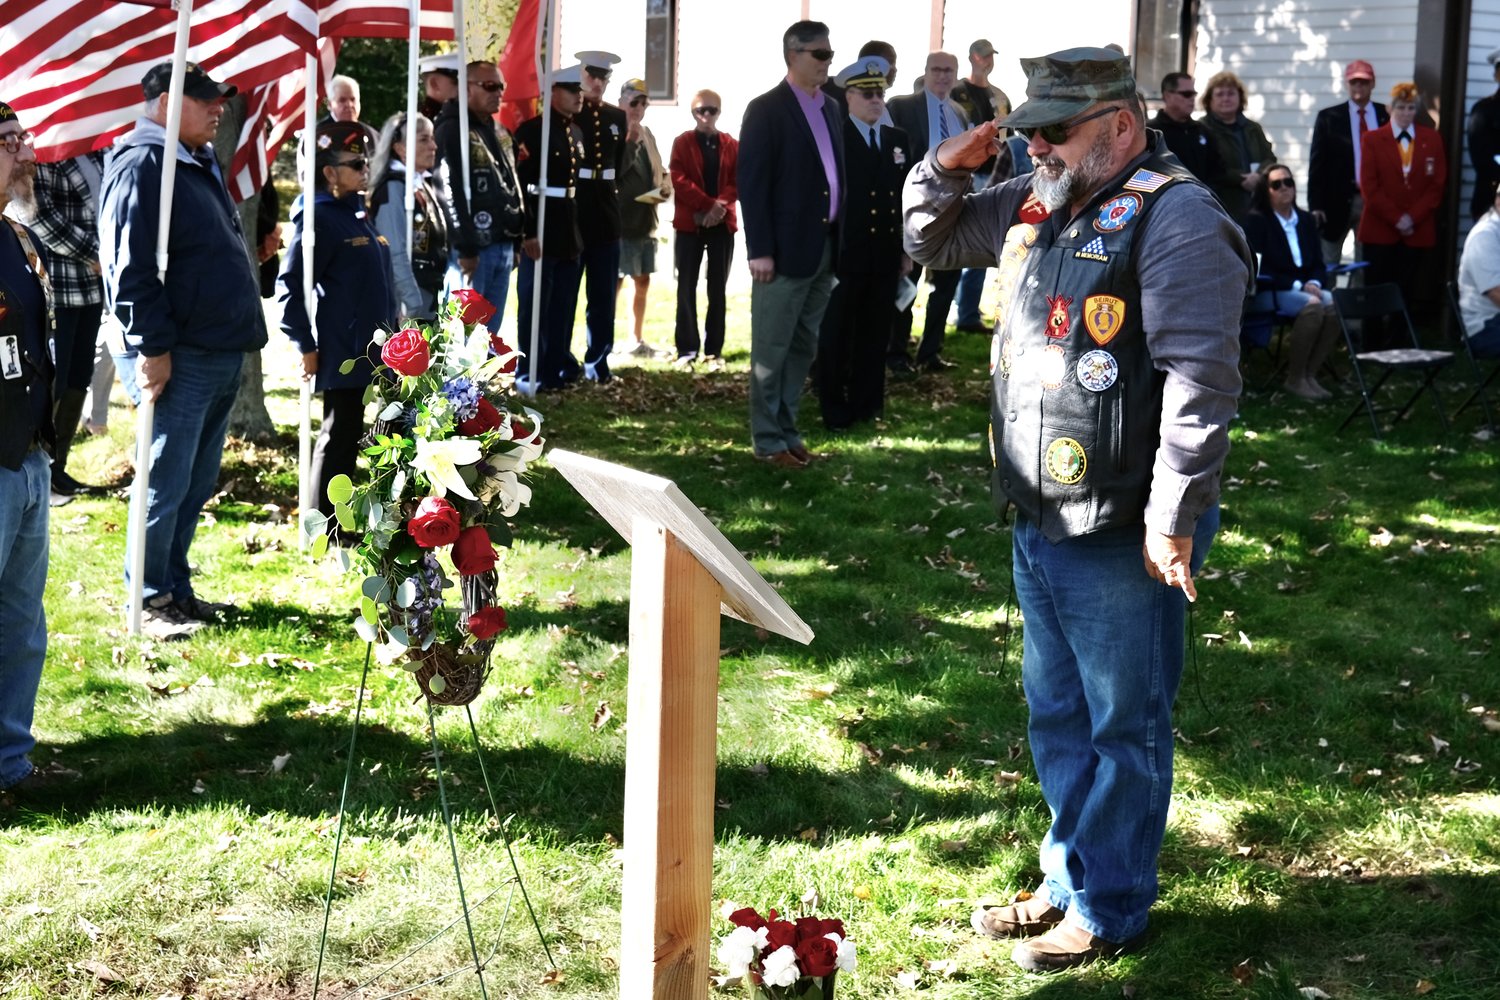 Russ Shipp salutes the memory of his brother, Corp. Thomas A. Shipp, after placing a rose to a wreath outside the Portsmouth Historical Society during the annual Beirut Memorial Service on Saturday. Corp. Shipp was among the nine Rhode Islanders killed in the Beirut terrorist bombing attack on Oct. 23, 1983.